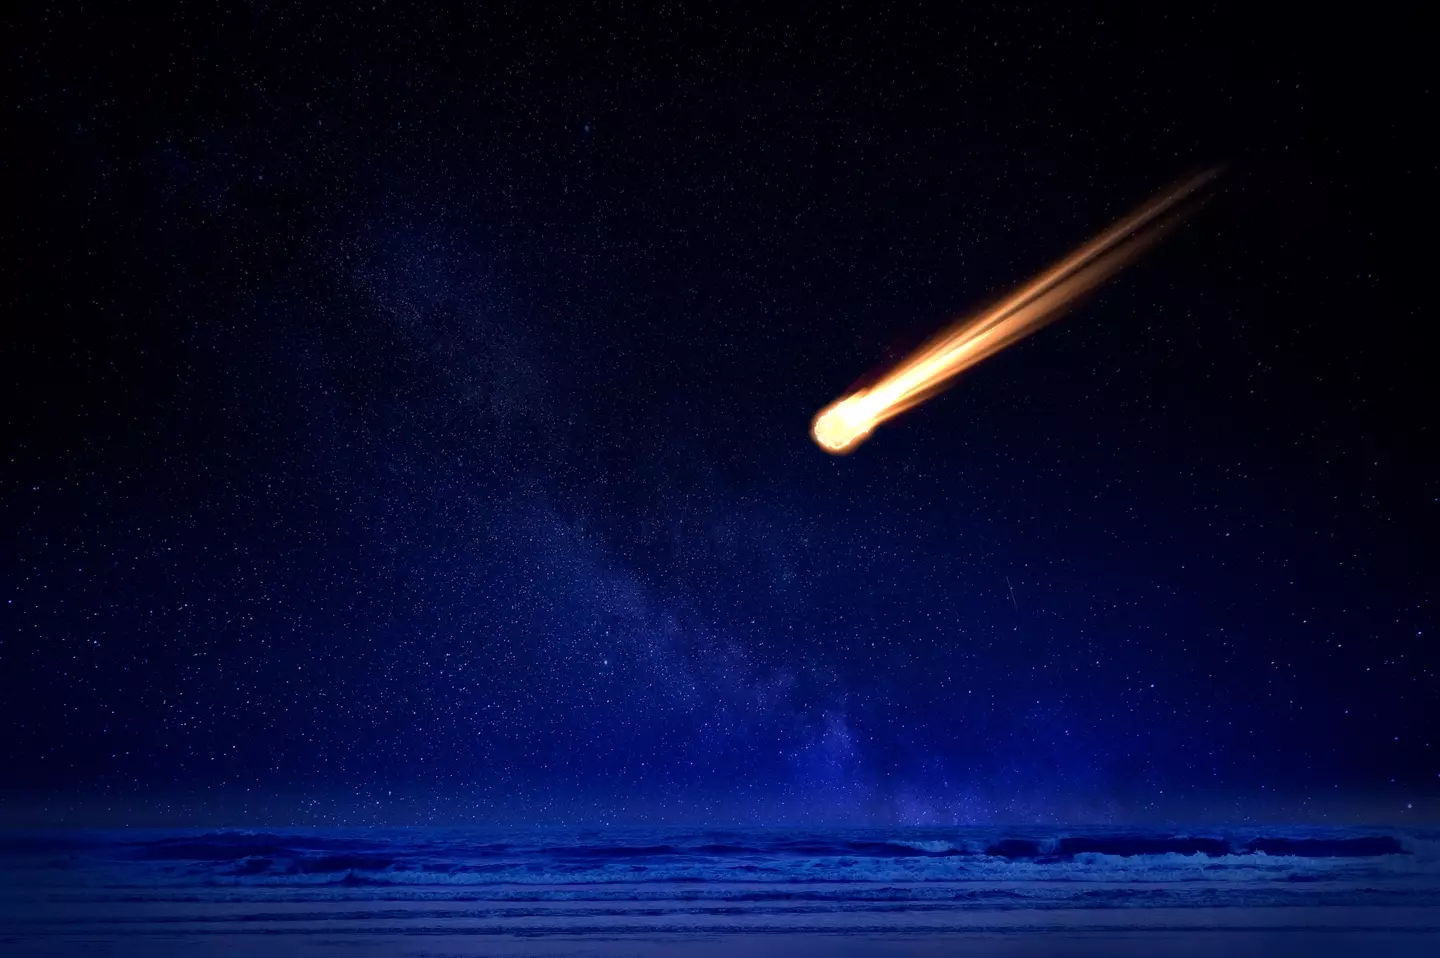 Astronomers are hoping the comet will be visible to the naked eye this year.